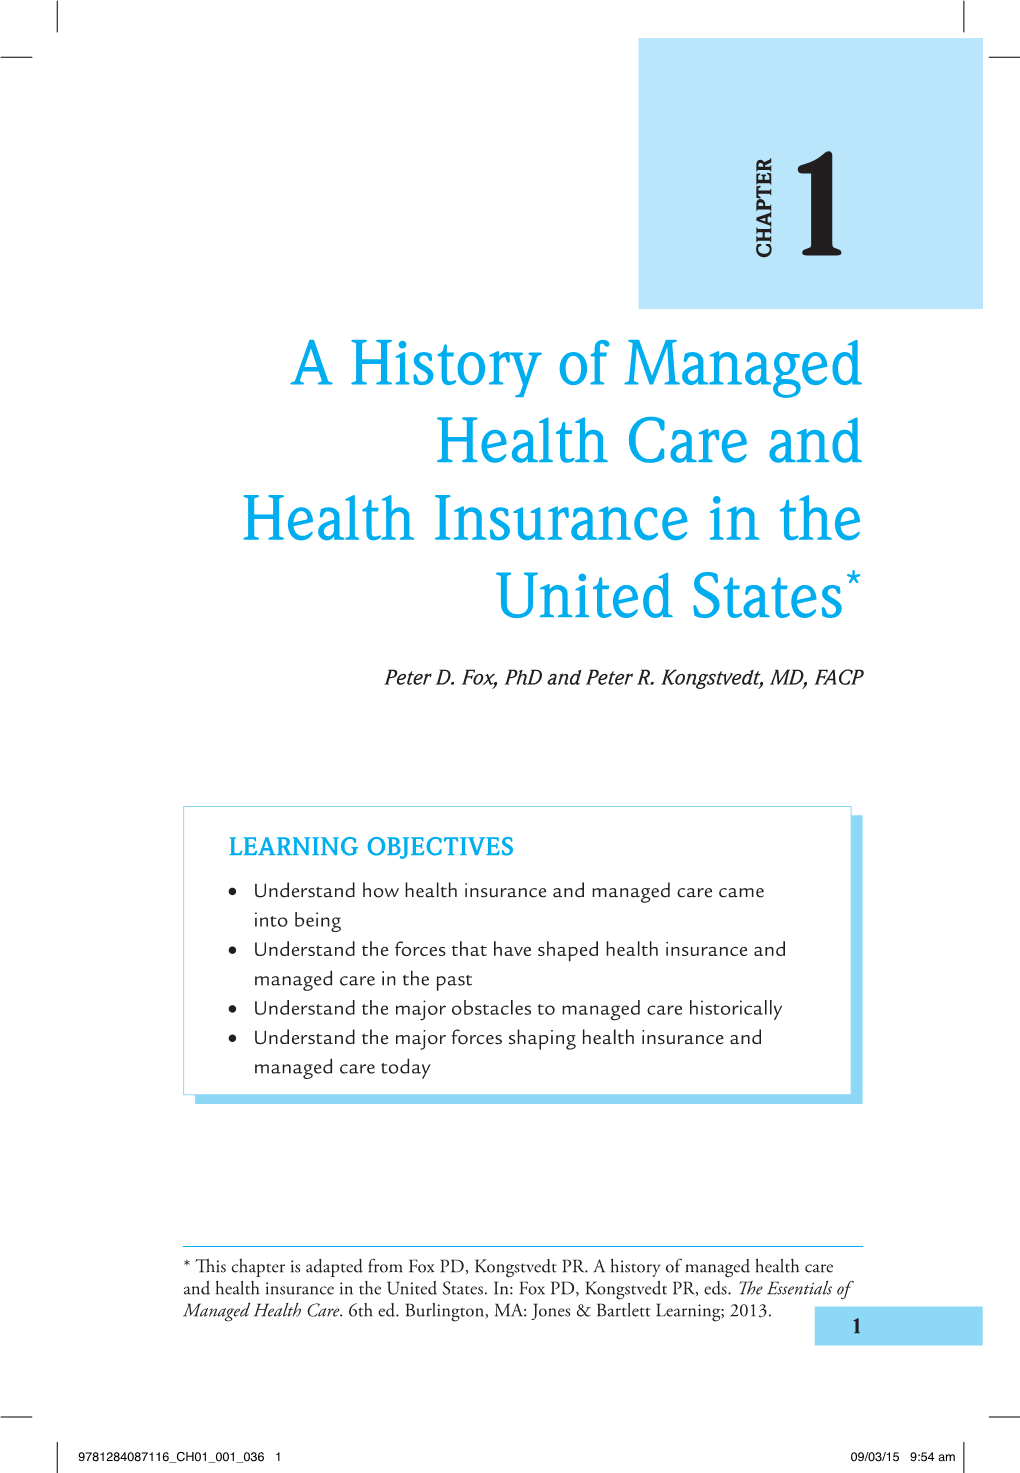 A History of Managed Health Care and Health Insurance in the United States*